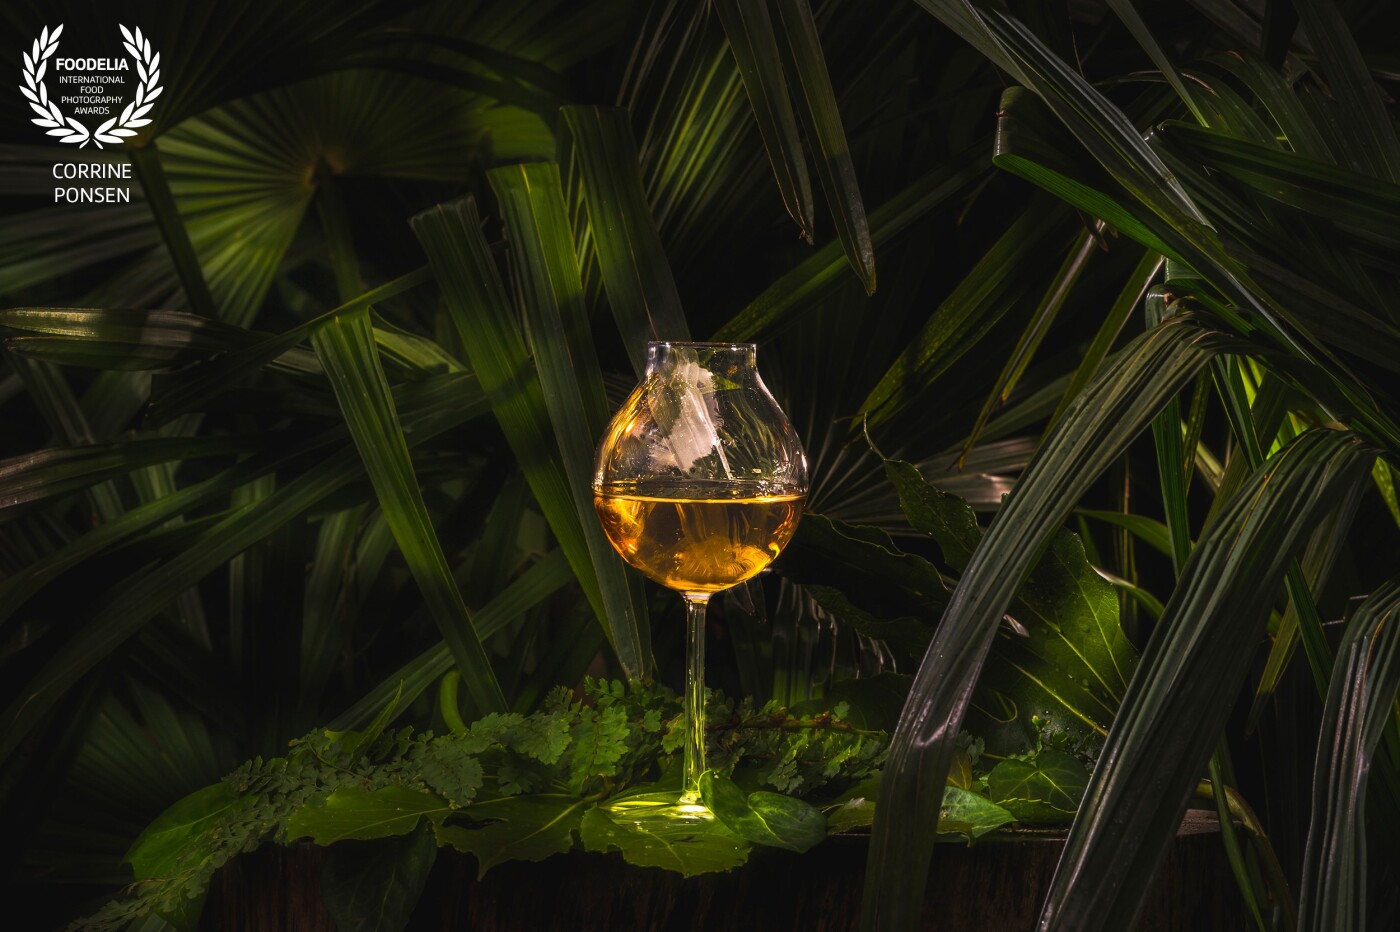 For a company who sells whiskeyglasses I made this picture with 2 flashes. On the left is a flash with octabox and grid as the mainlight on the right at the back I used a backlight just to give some light and shadow on the leaves. The background are some palmes in my own garden. So this picture is made outside in the backyard, wich makes it very special to me.